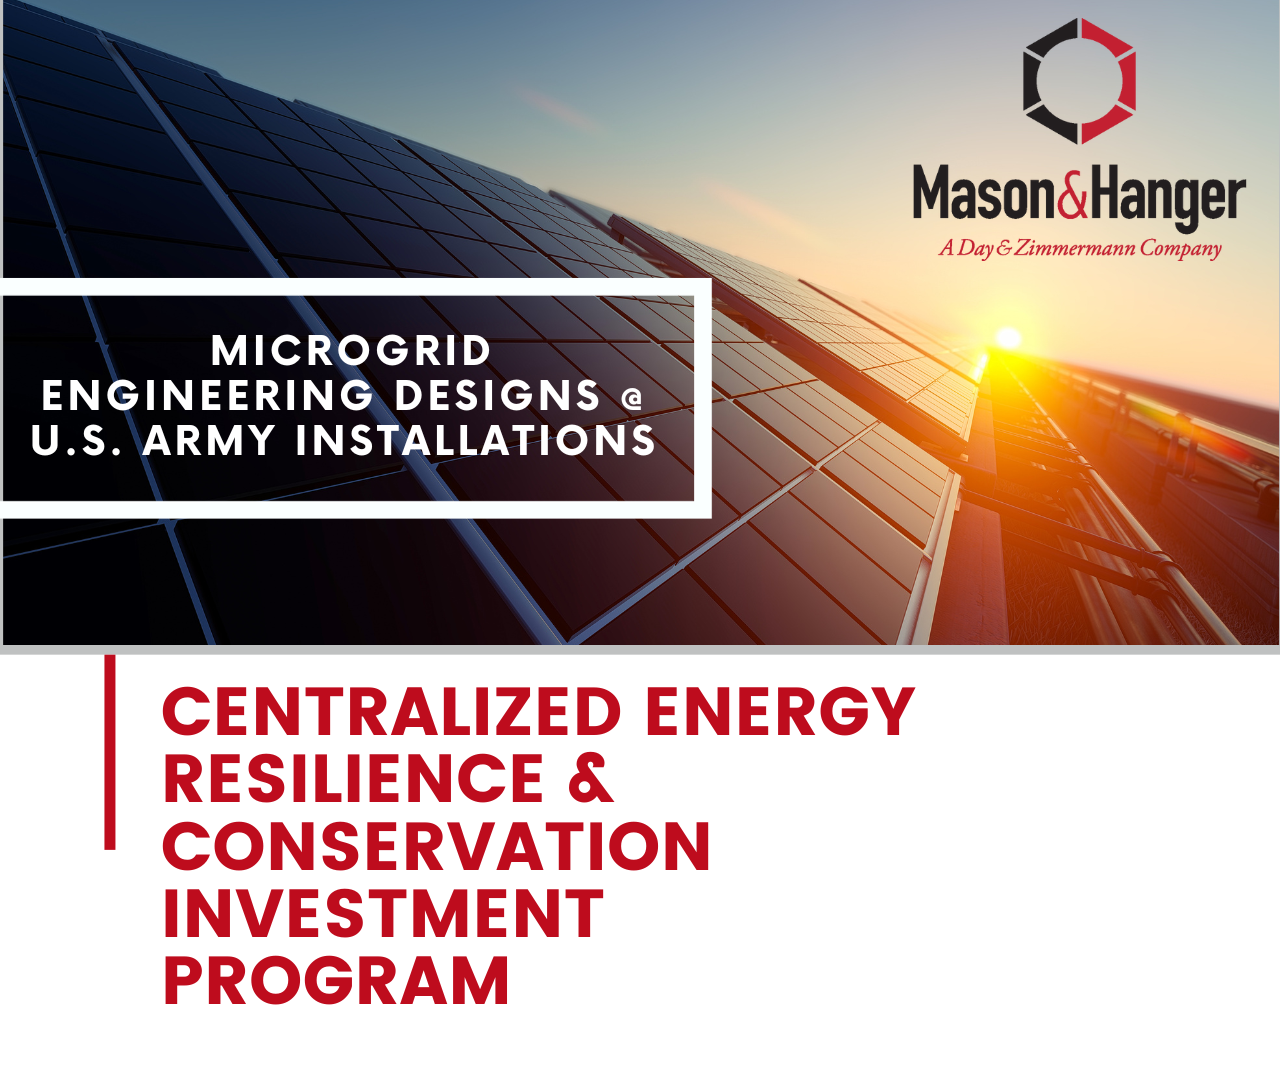 Mason & Hanger Selected for Multiple Microgrid Engineering Designs at U.S. Army Installations